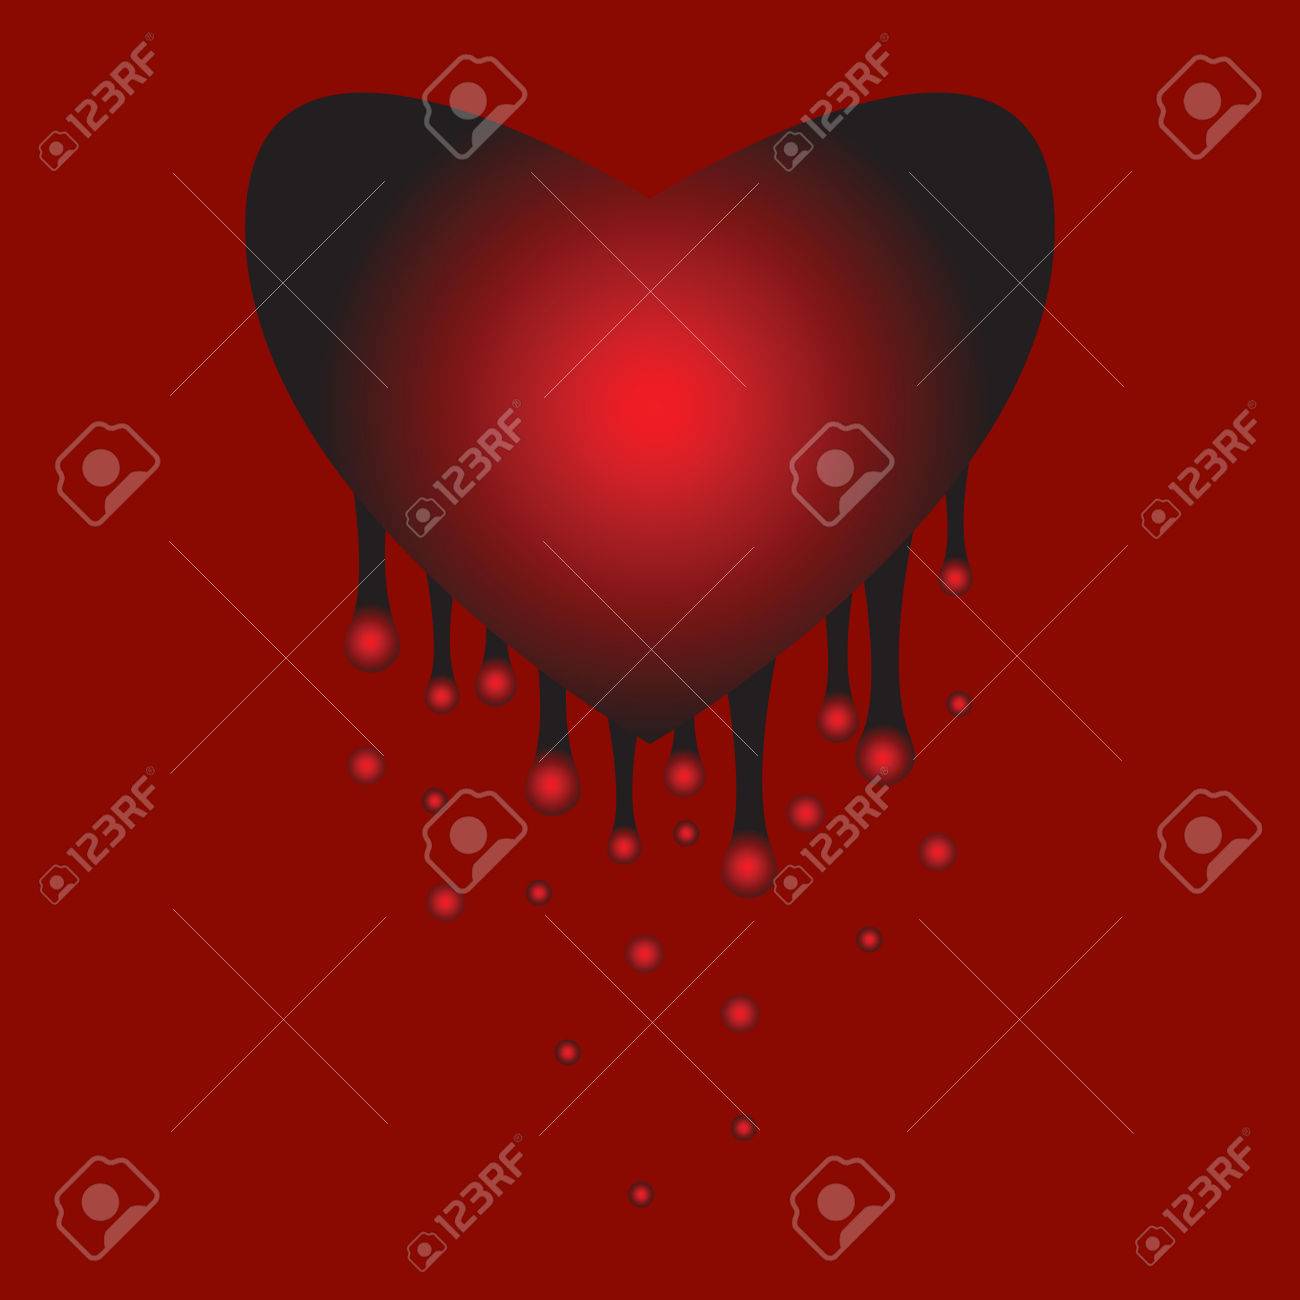 Bleeding Heart Pain The Loss Of Love Background Royalty